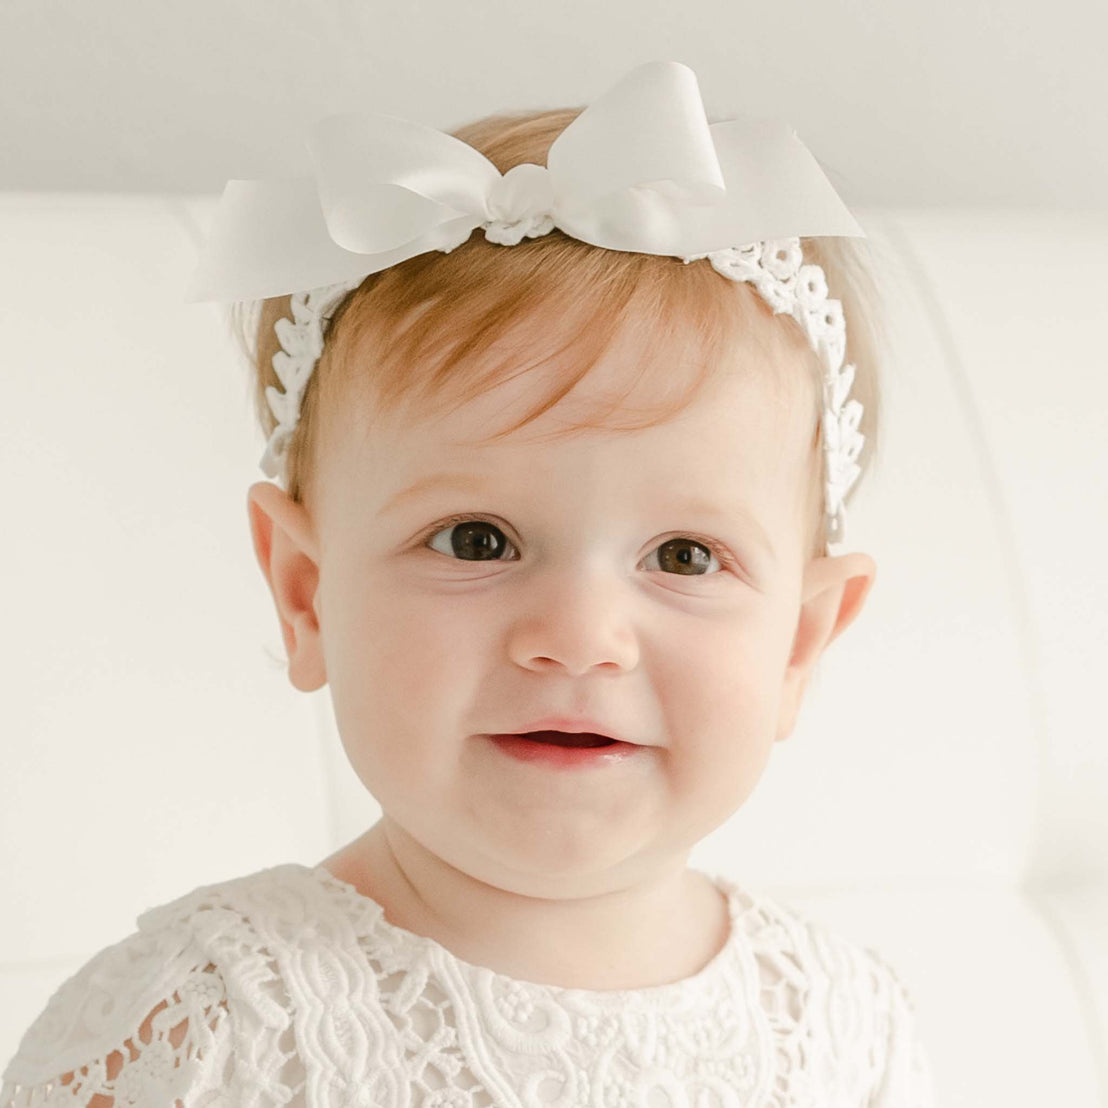 Baby girl with red hair smiling and wearing the Adeline lace headband made of cotton and silk ribbon.